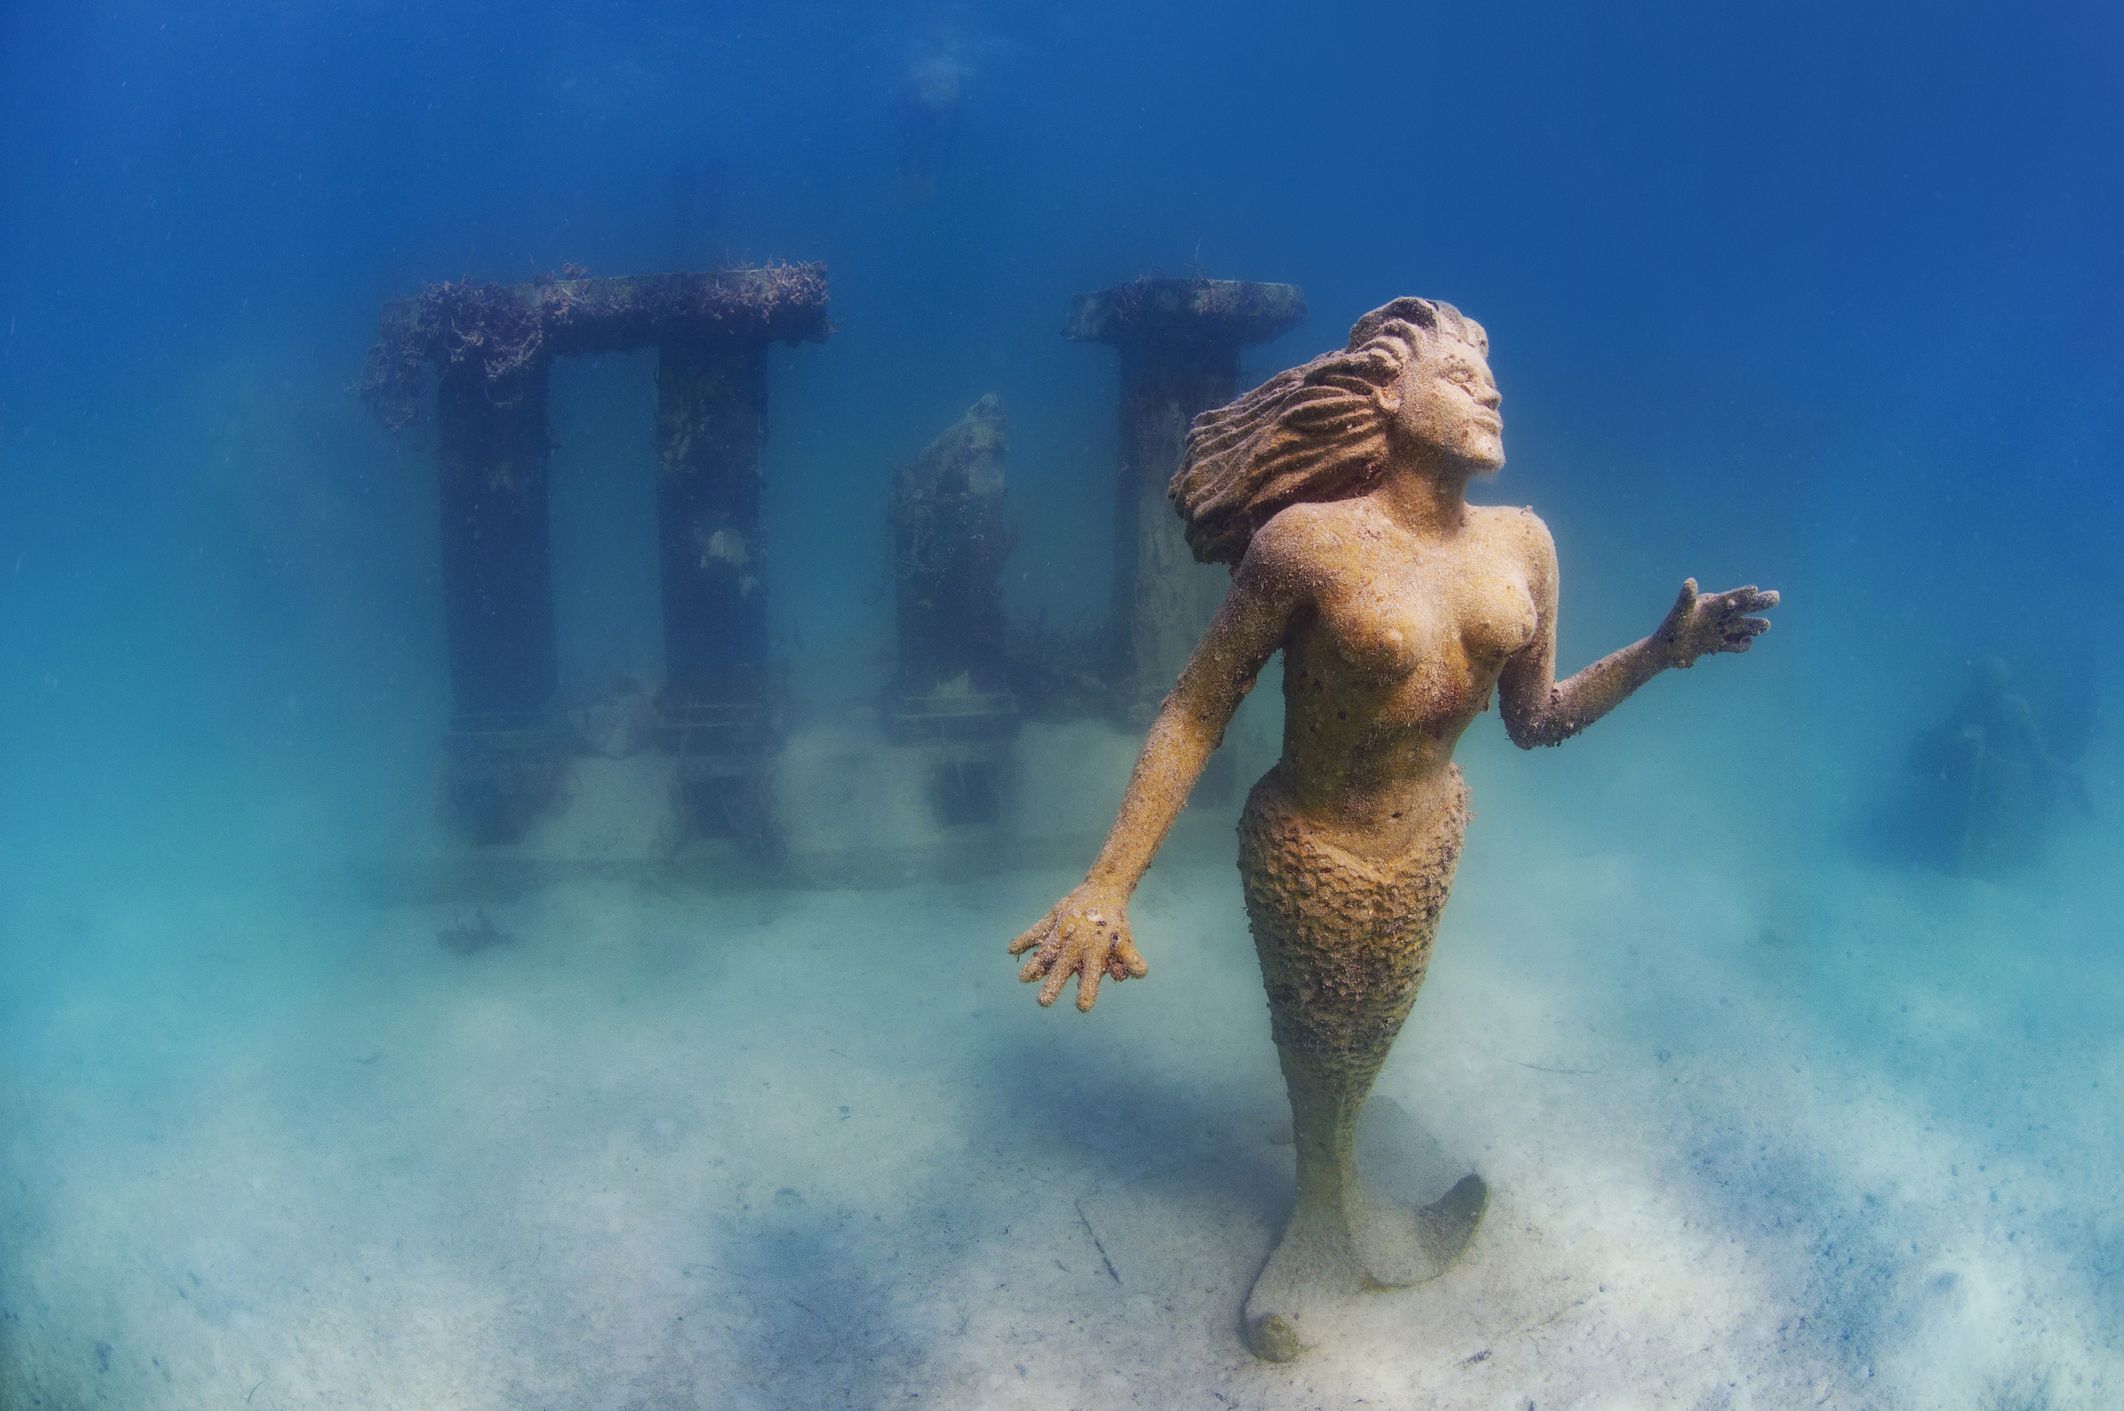 https://hips.hearstapps.com/hmg-prod/images/antique-underwater-archaeological-mayan-ruins-royalty-free-image-1591268624.jpg